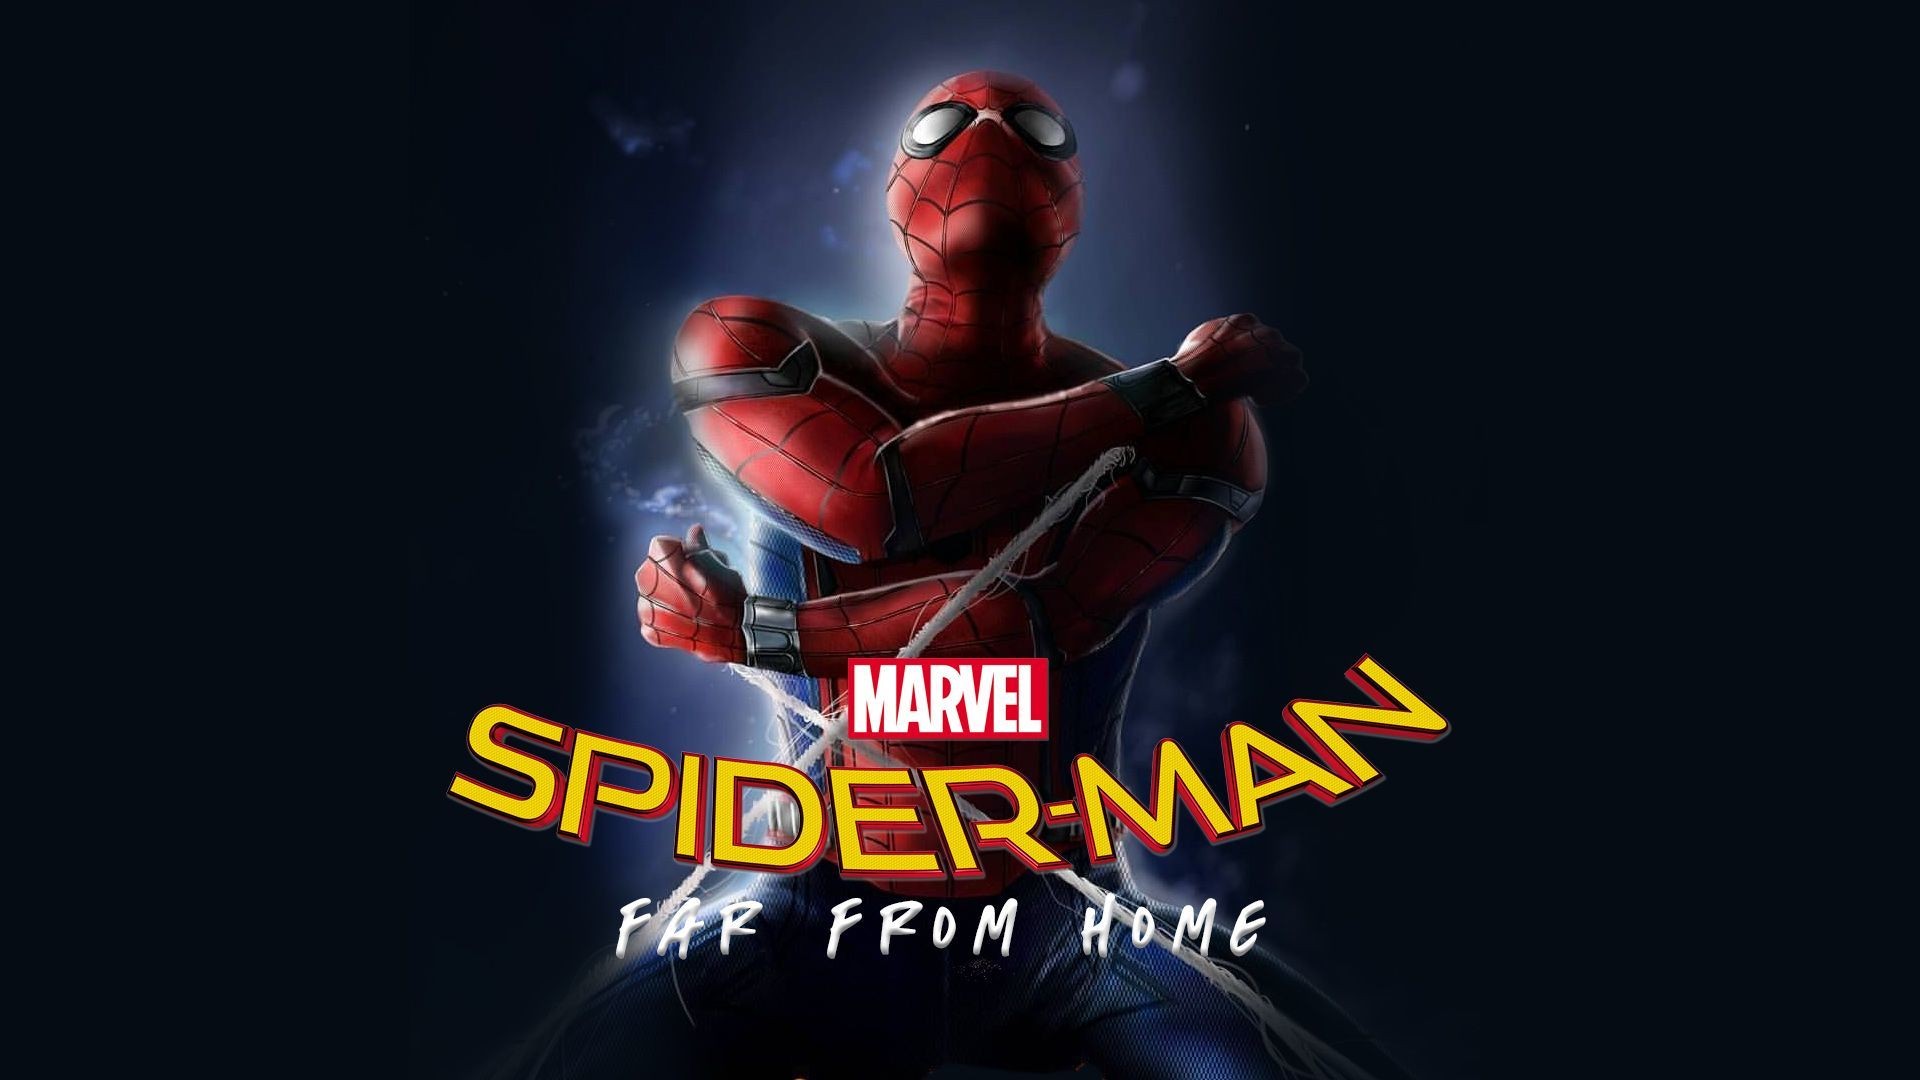 Wallpapers Spider-Man Far From Home with high-resolution 1920x1080 pixel. You can use this poster wallpaper for your Desktop Computers, Mac Screensavers, Windows Backgrounds, iPhone Wallpapers, Tablet or Android Lock screen and another Mobile device